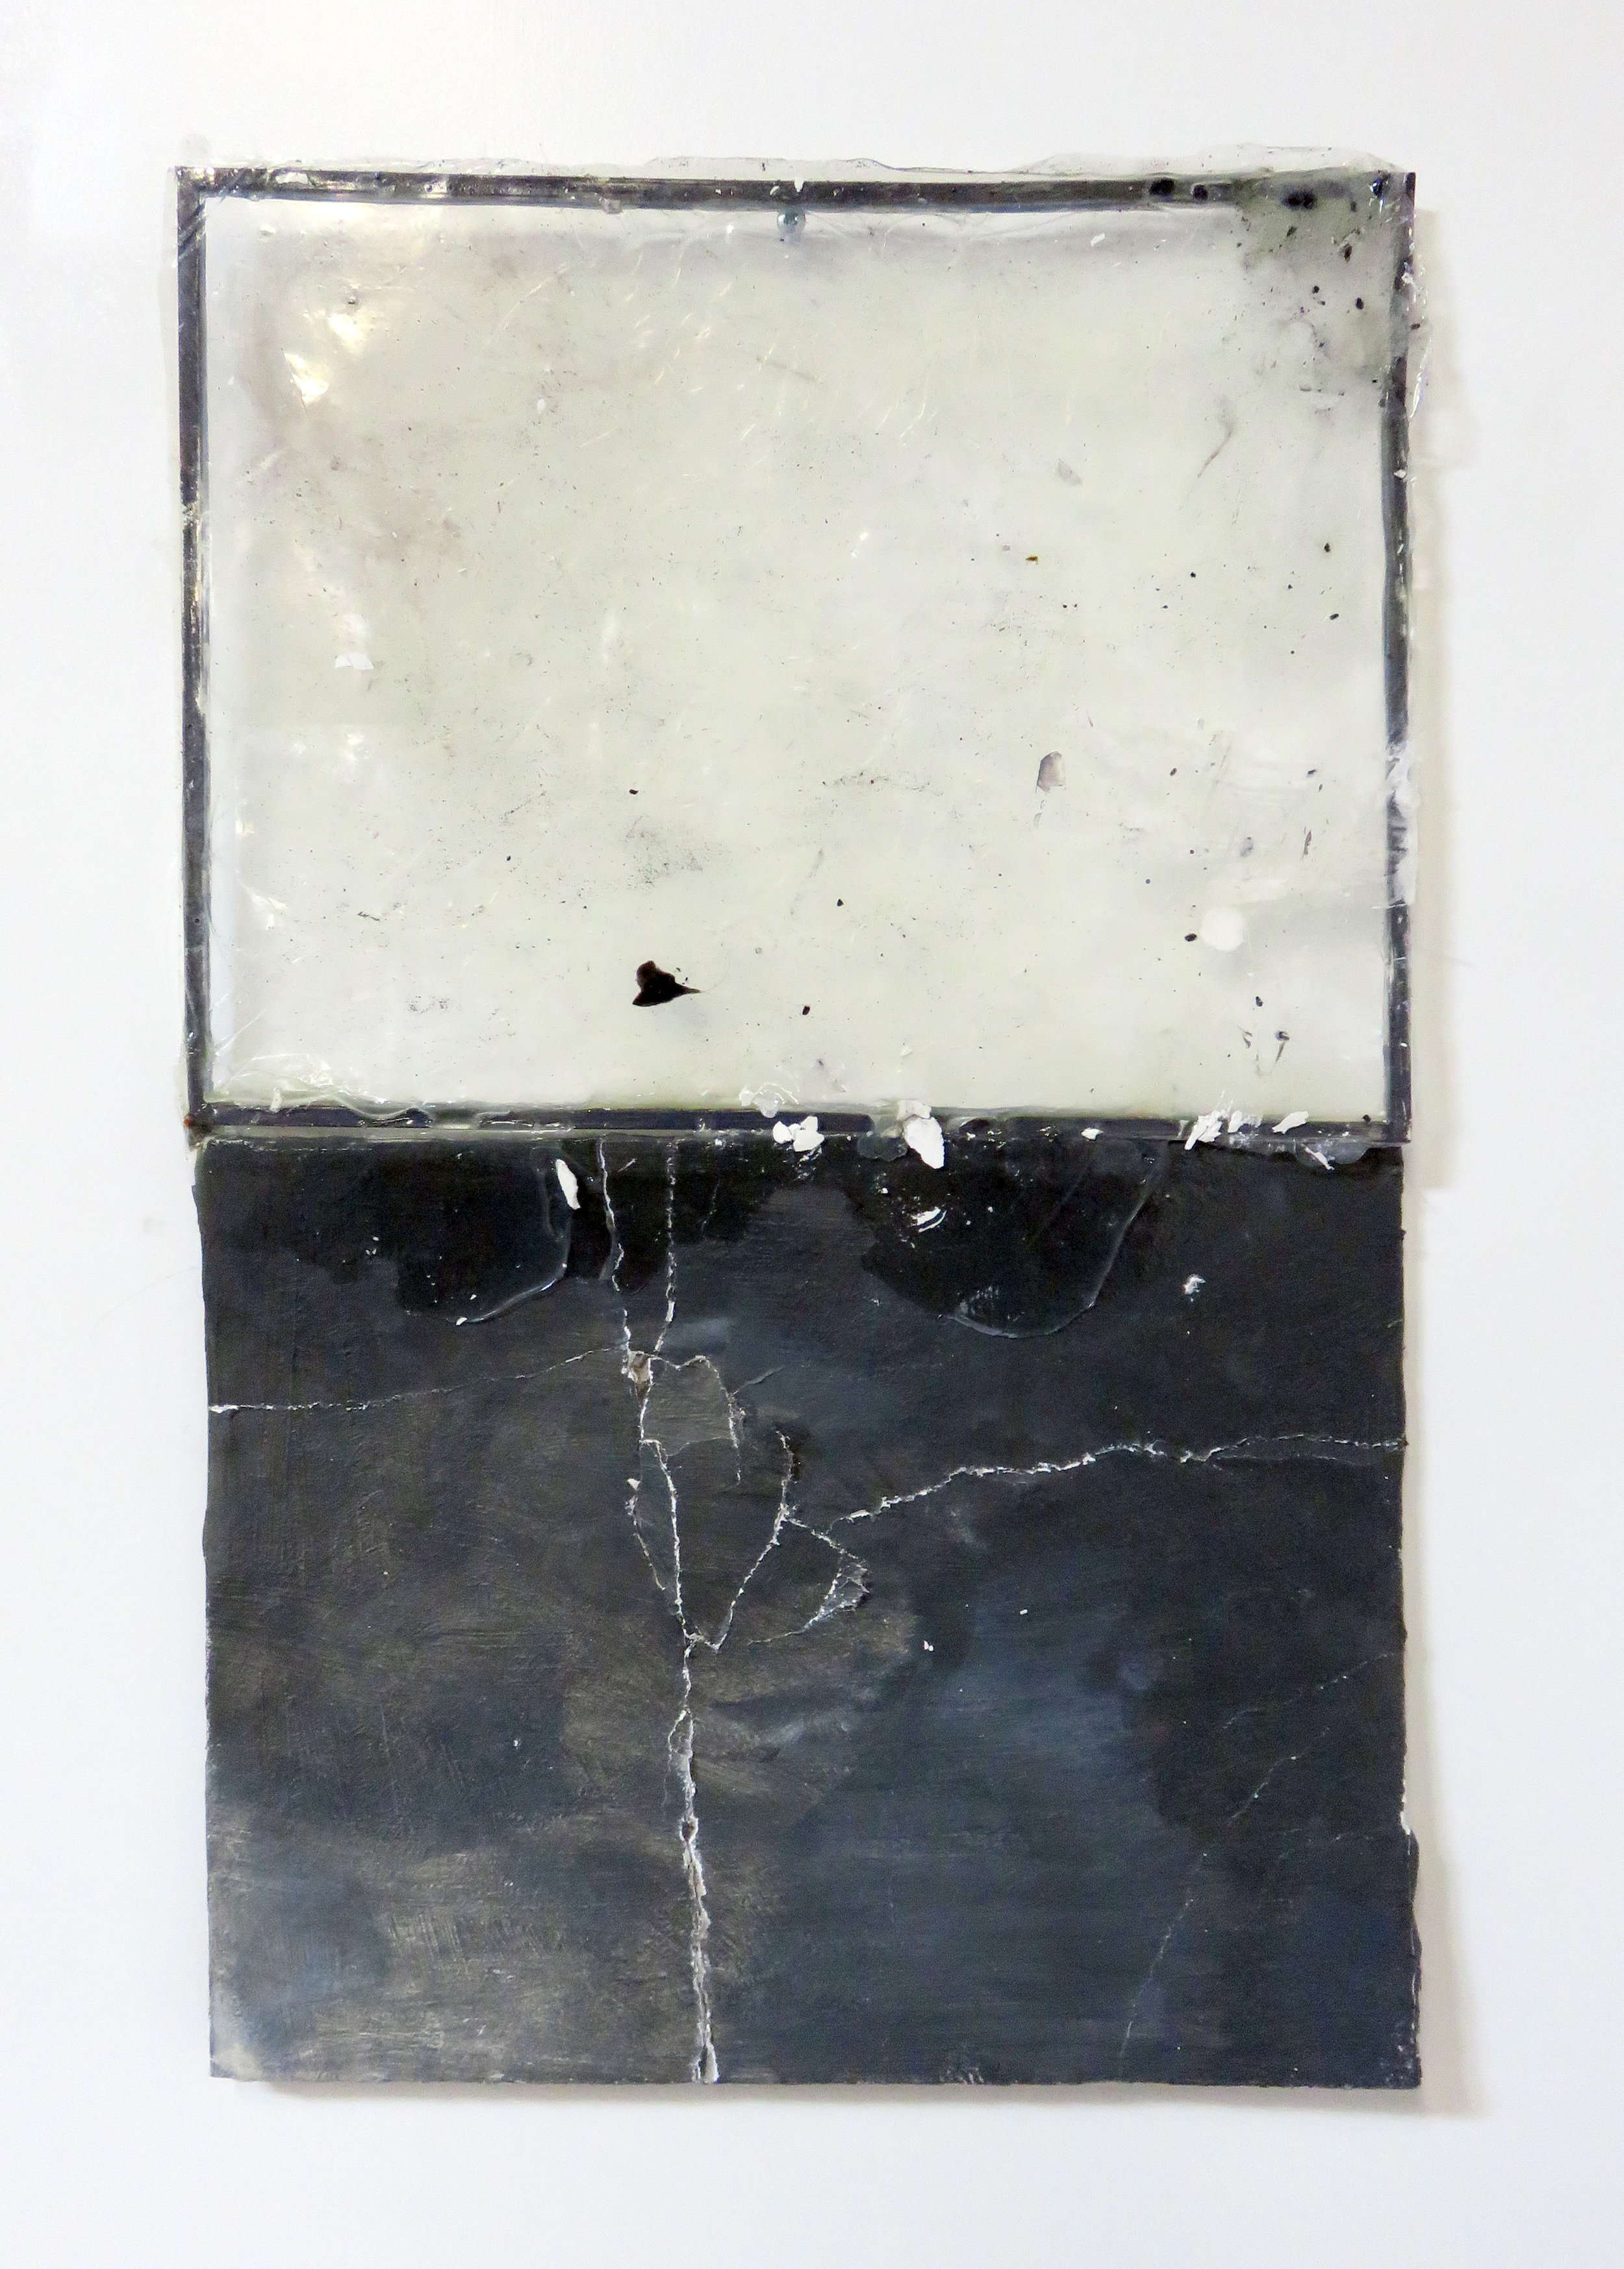   Puncture (II) , 2014  acrylic polymer, plaster, metal frame  10 x 22”    